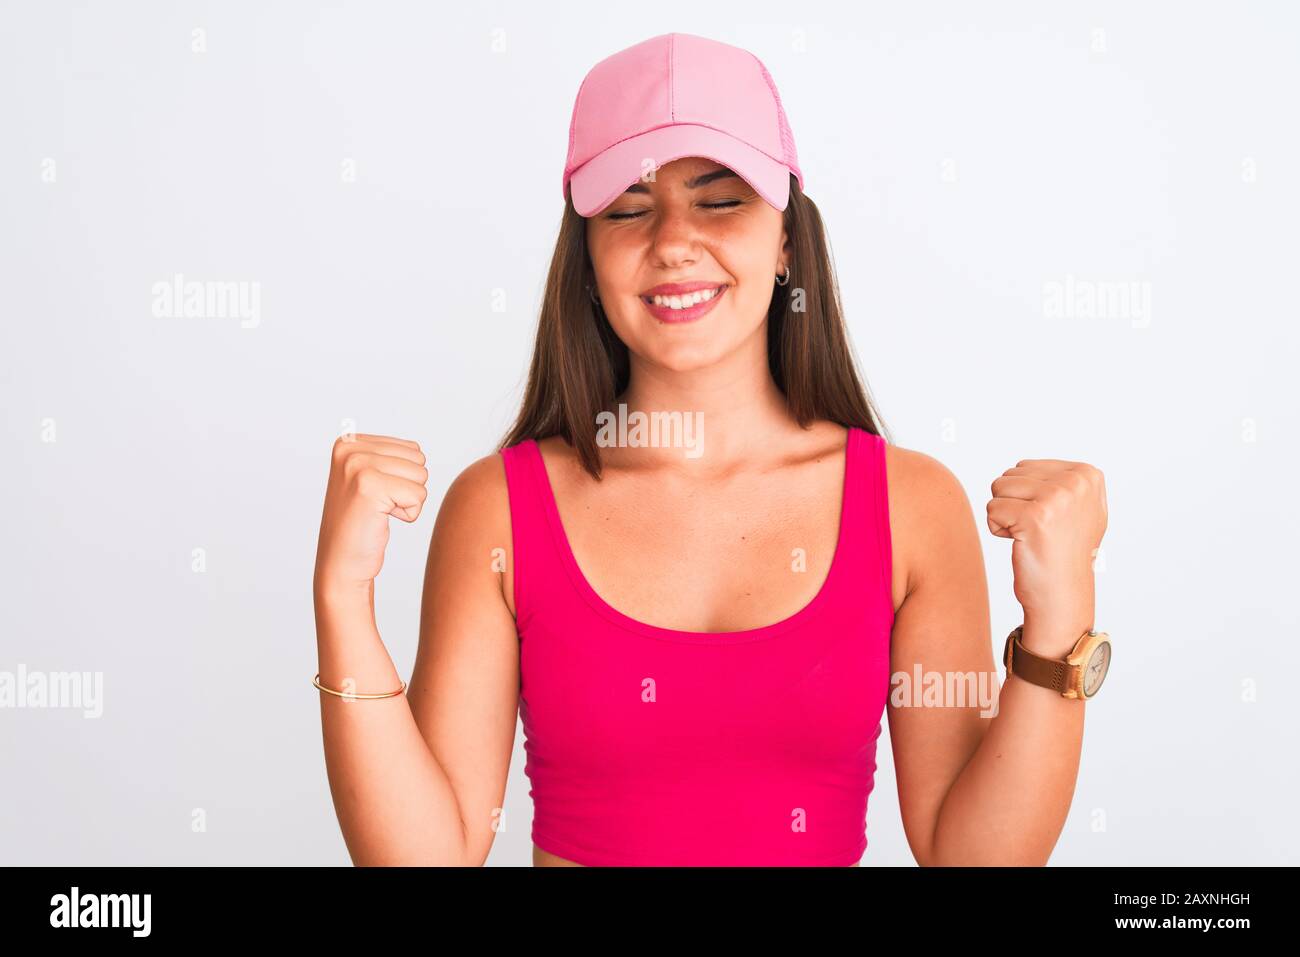 Young beautiful girl wearing pink casual t-shirt and cap over isolated white background very happy and excited doing winner gesture with arms raised, Stock Photo